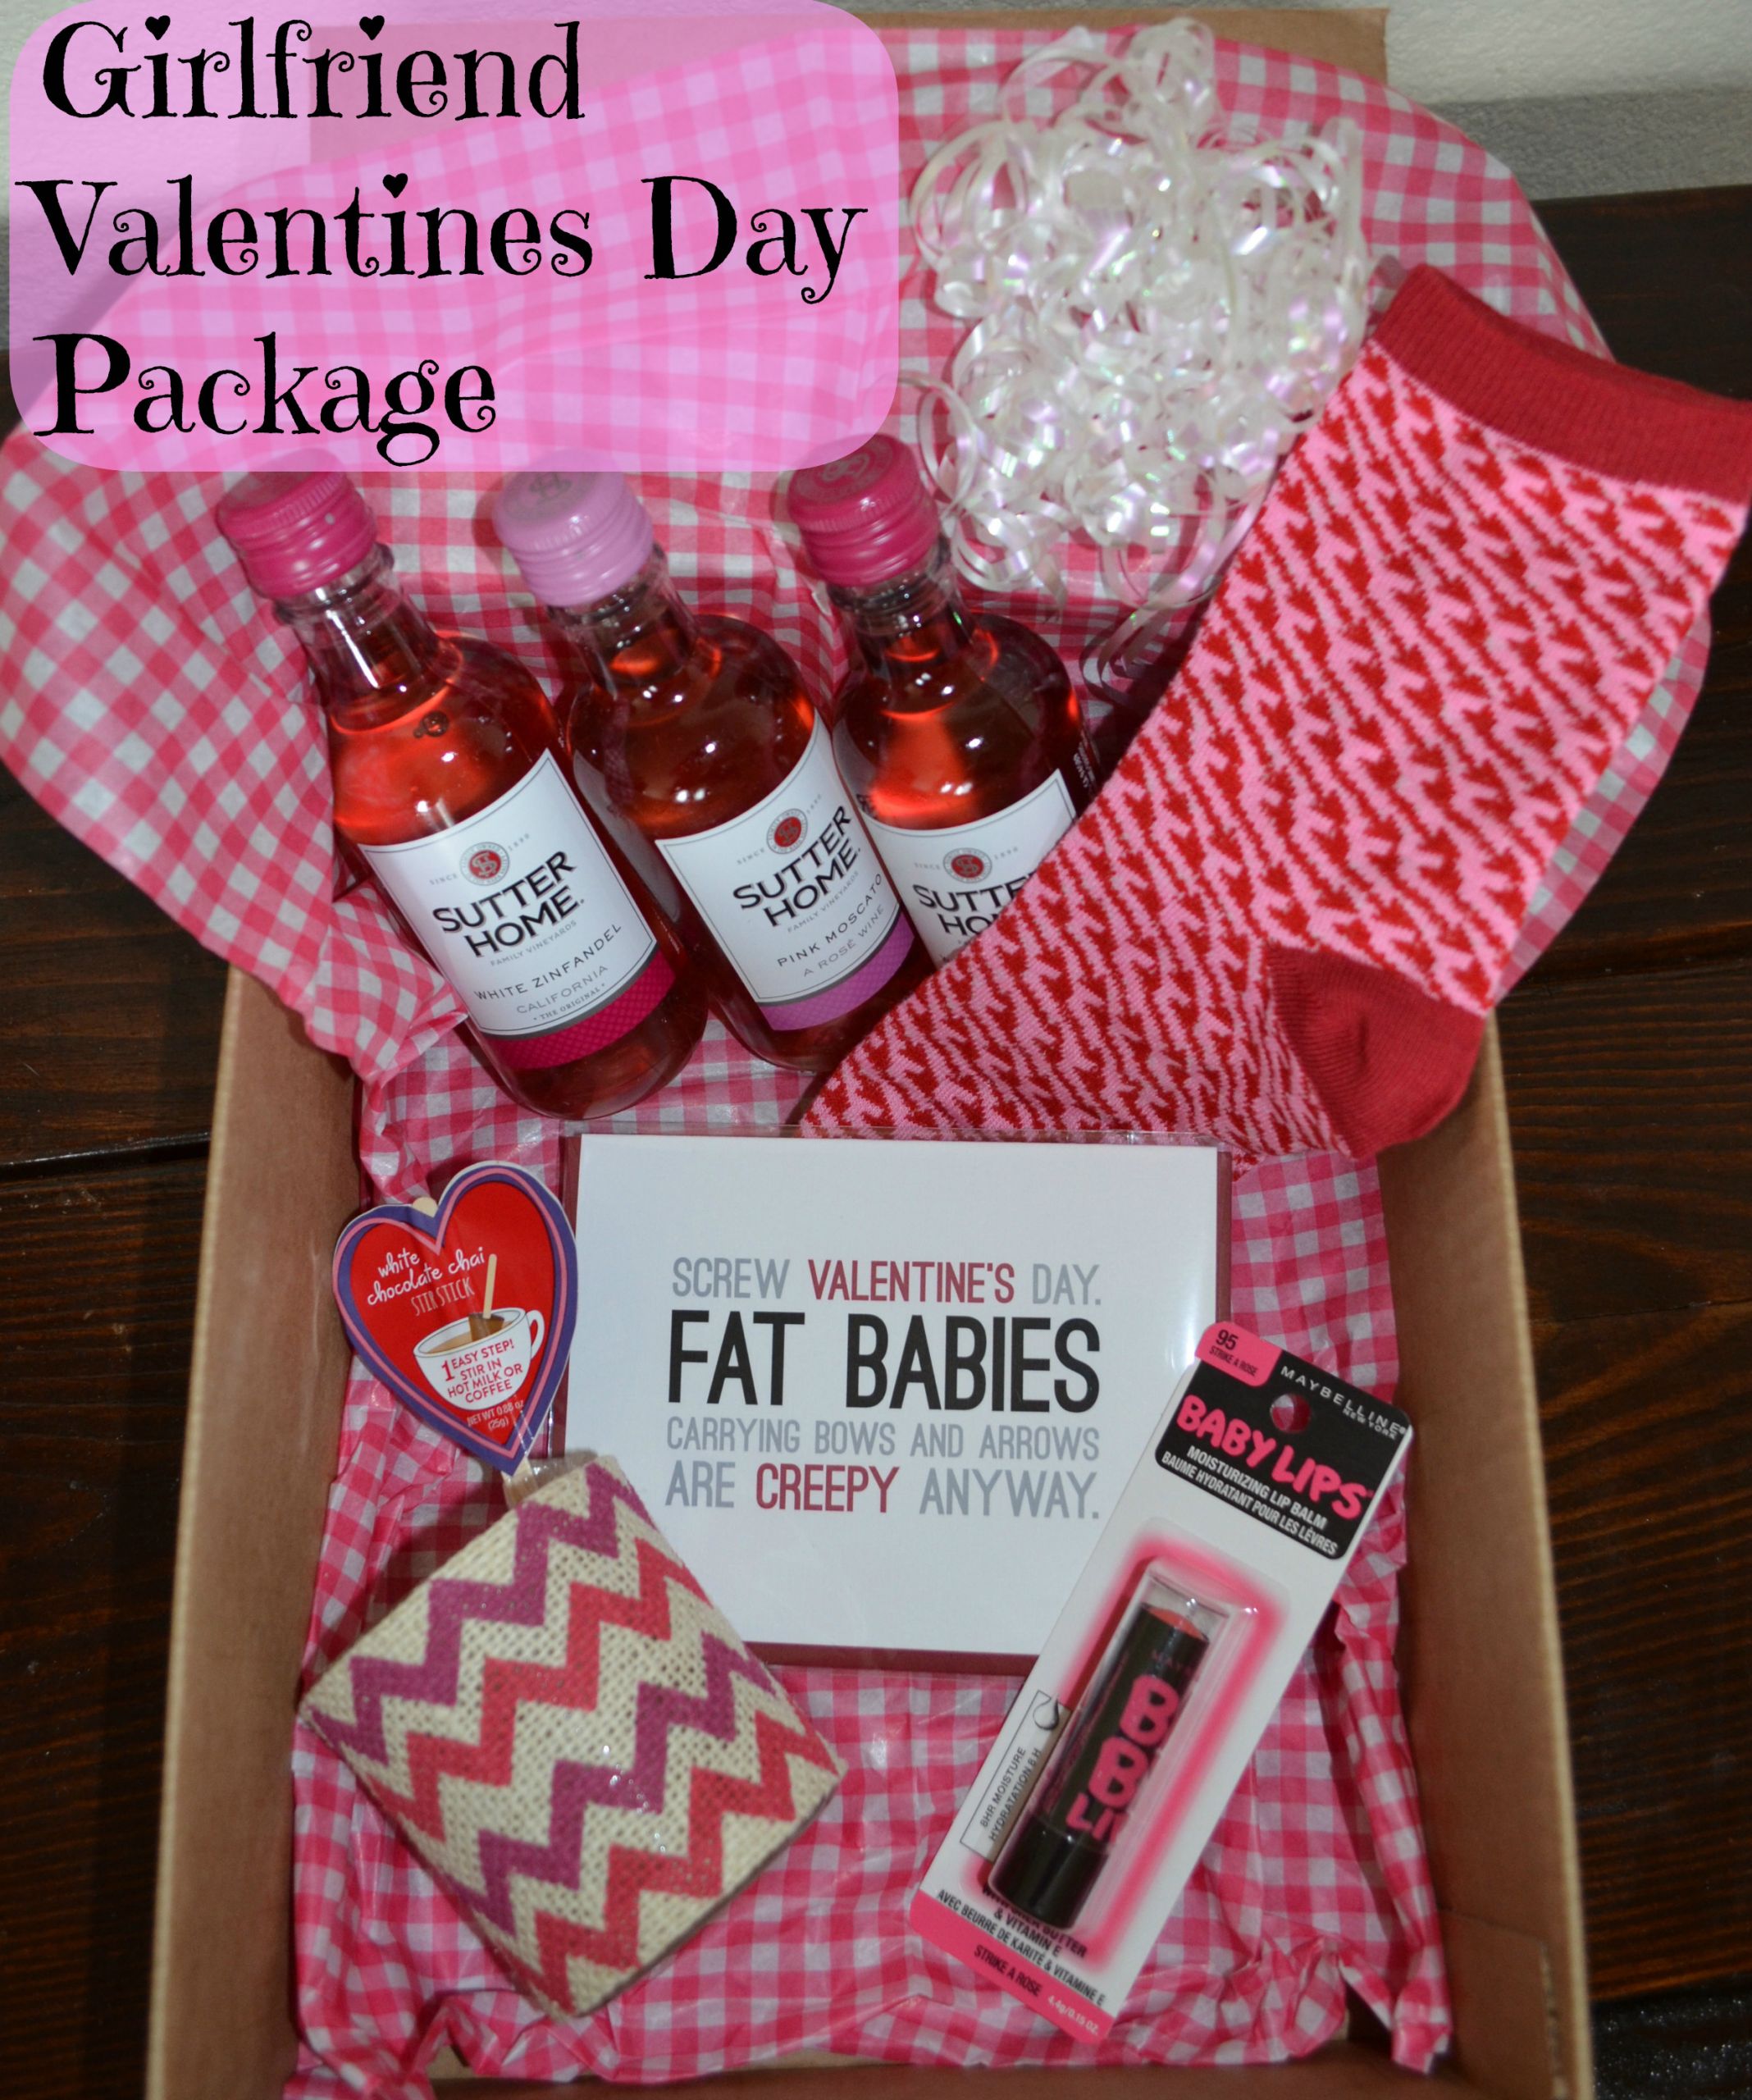 Valentine'S Day Gift Ideas For Women
 24 ADORABLE GIFT IDEAS FOR THE WOMEN IN YOUR LIFE